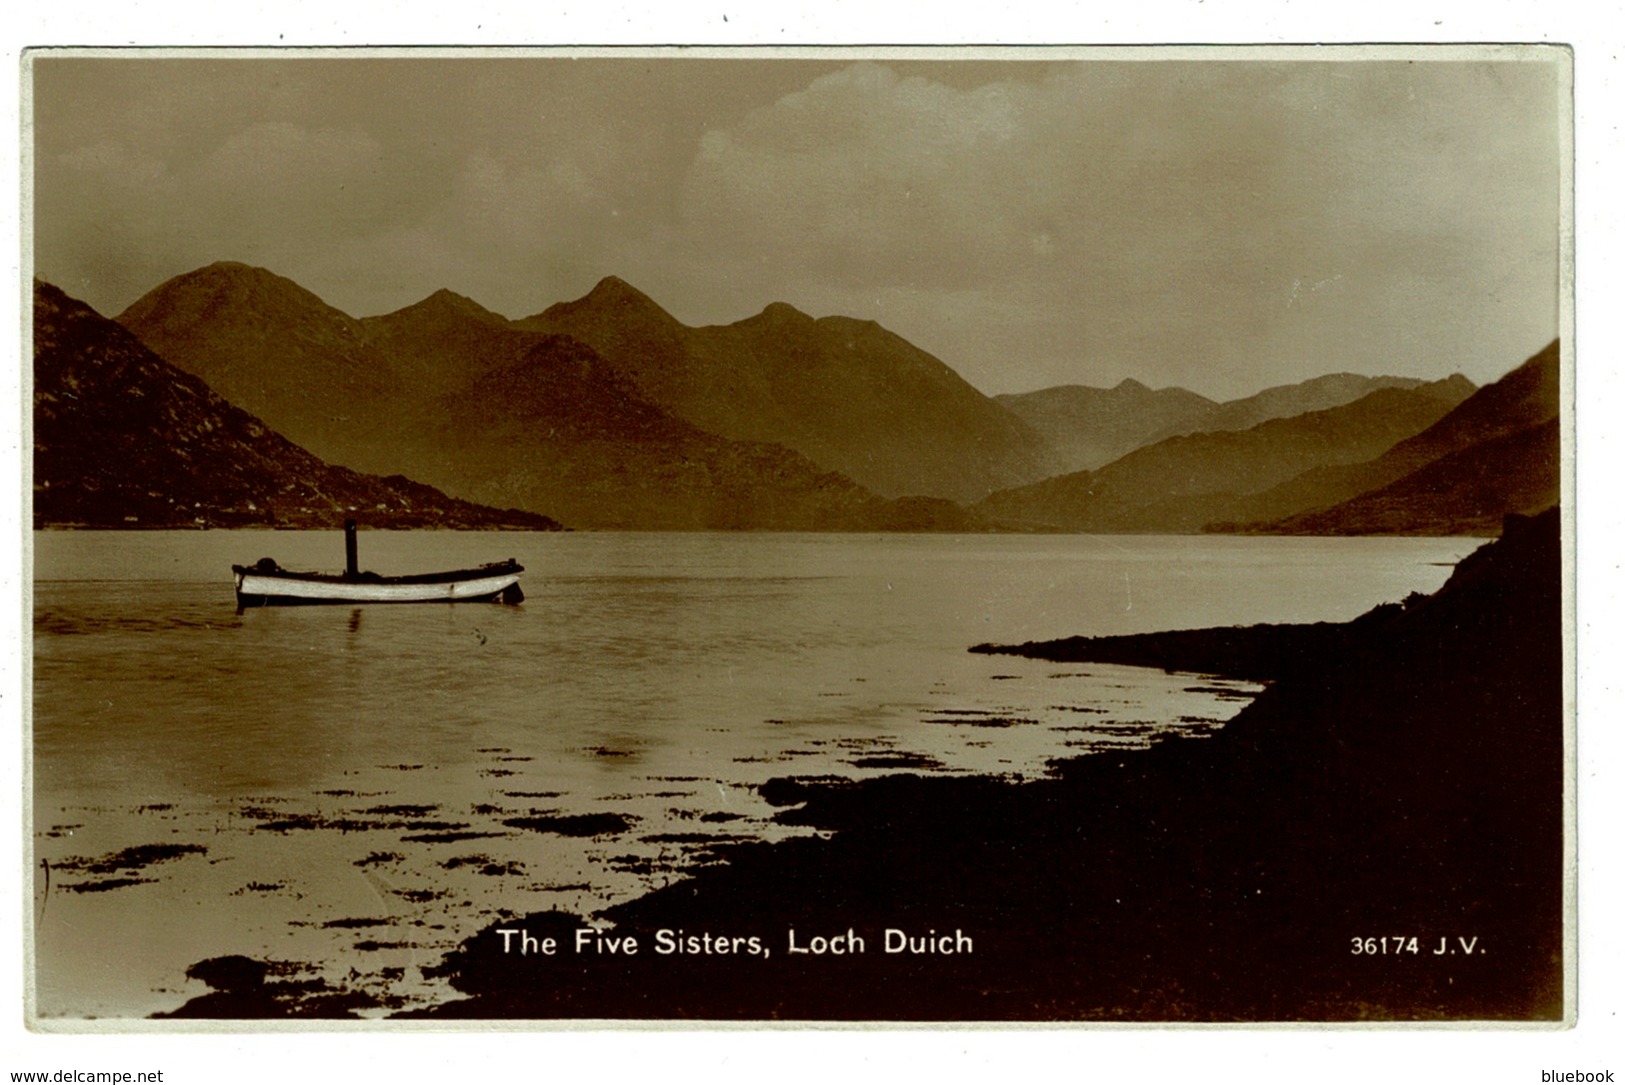 Ref 1314 - Early Real Photo Postcard - Steam Boat & Five Sisters Loch Duich - Wester Ross Scotland - Ross & Cromarty